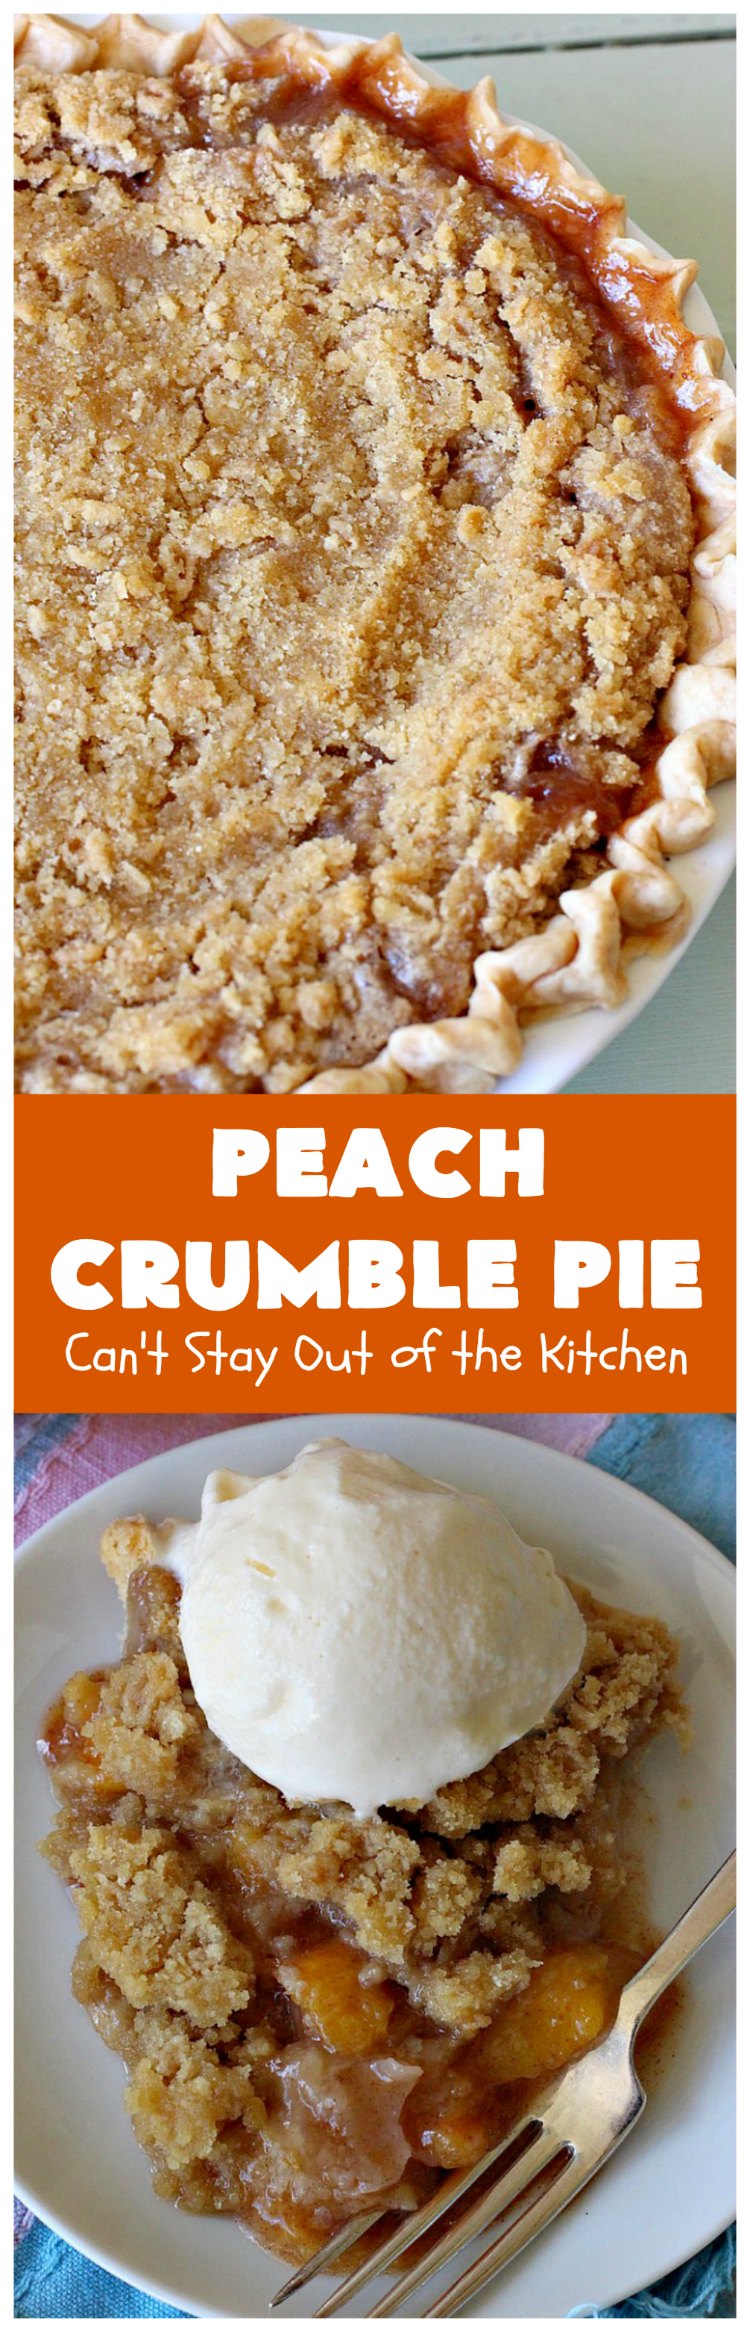 Peach Crumble Pie | Can't Stay Out of the Kitchen